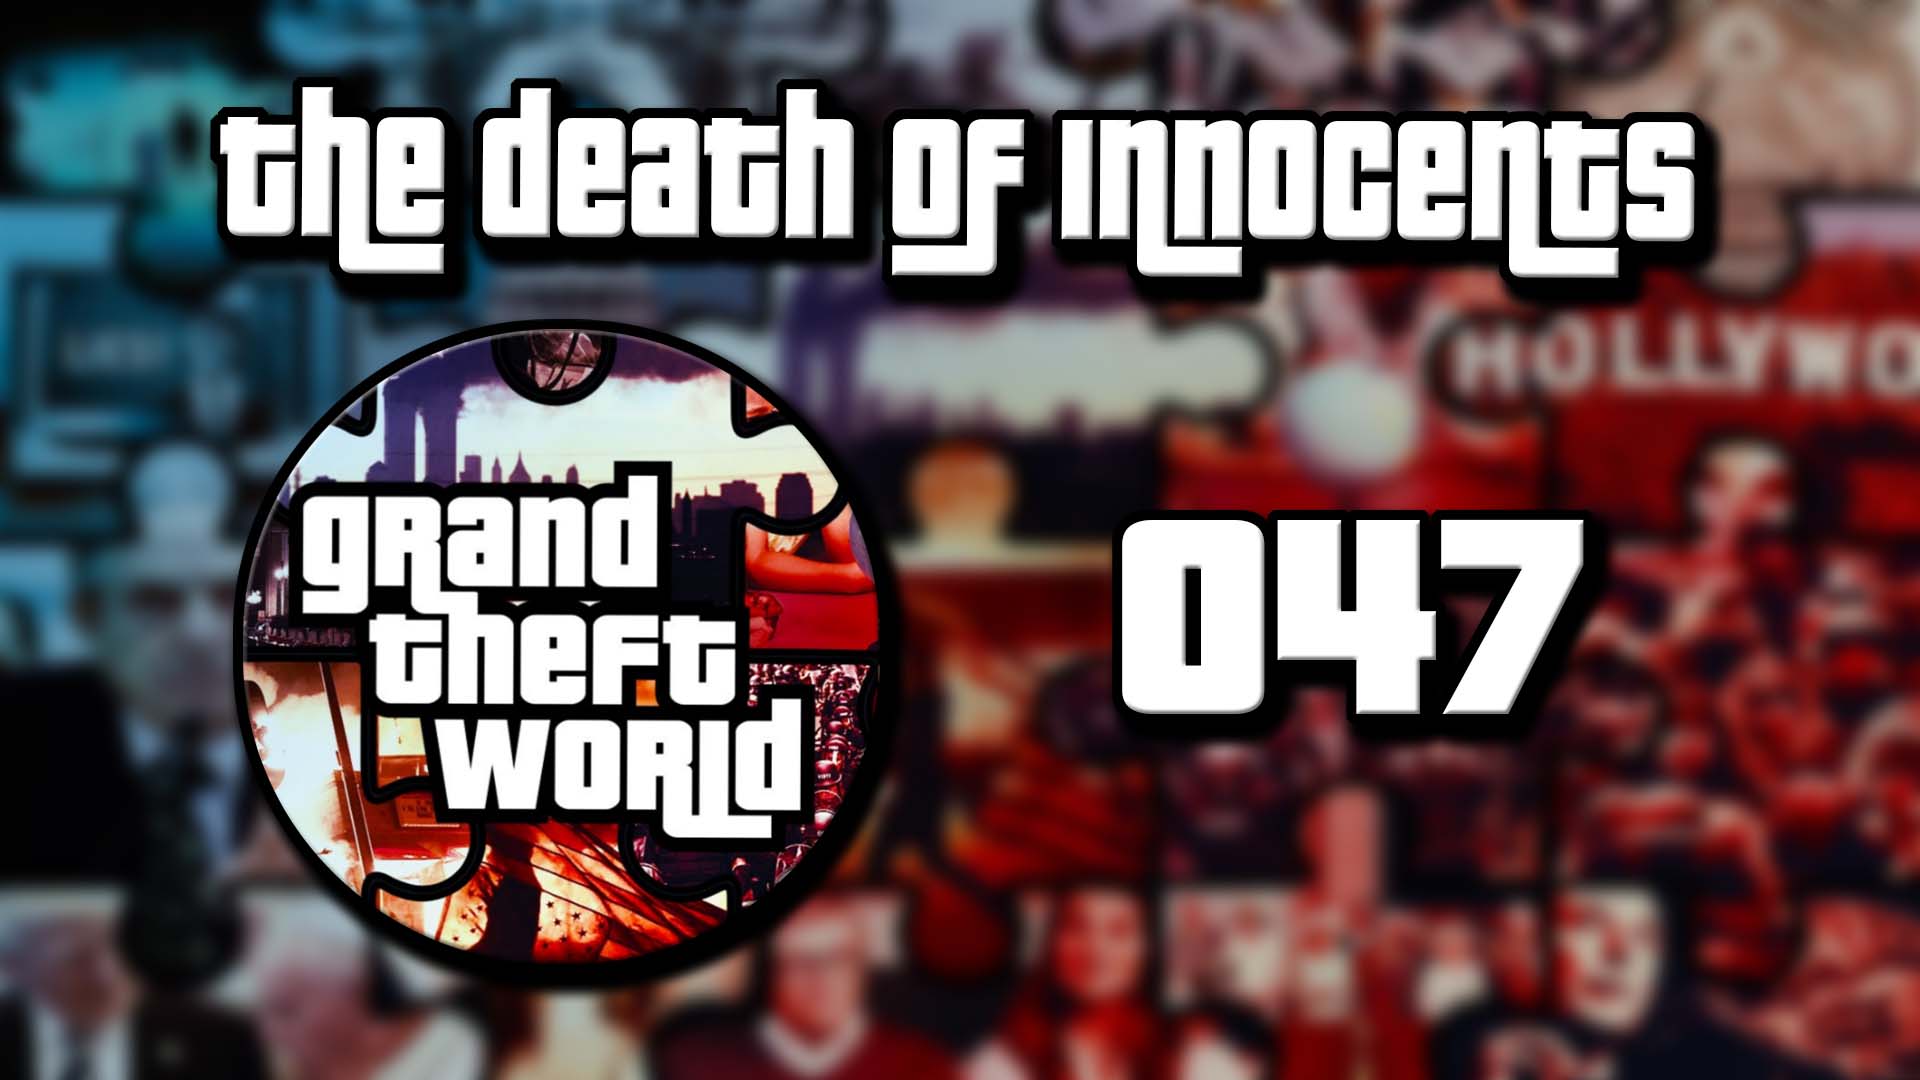 Grand Theft World Podcast 047 | The Death of Innocents